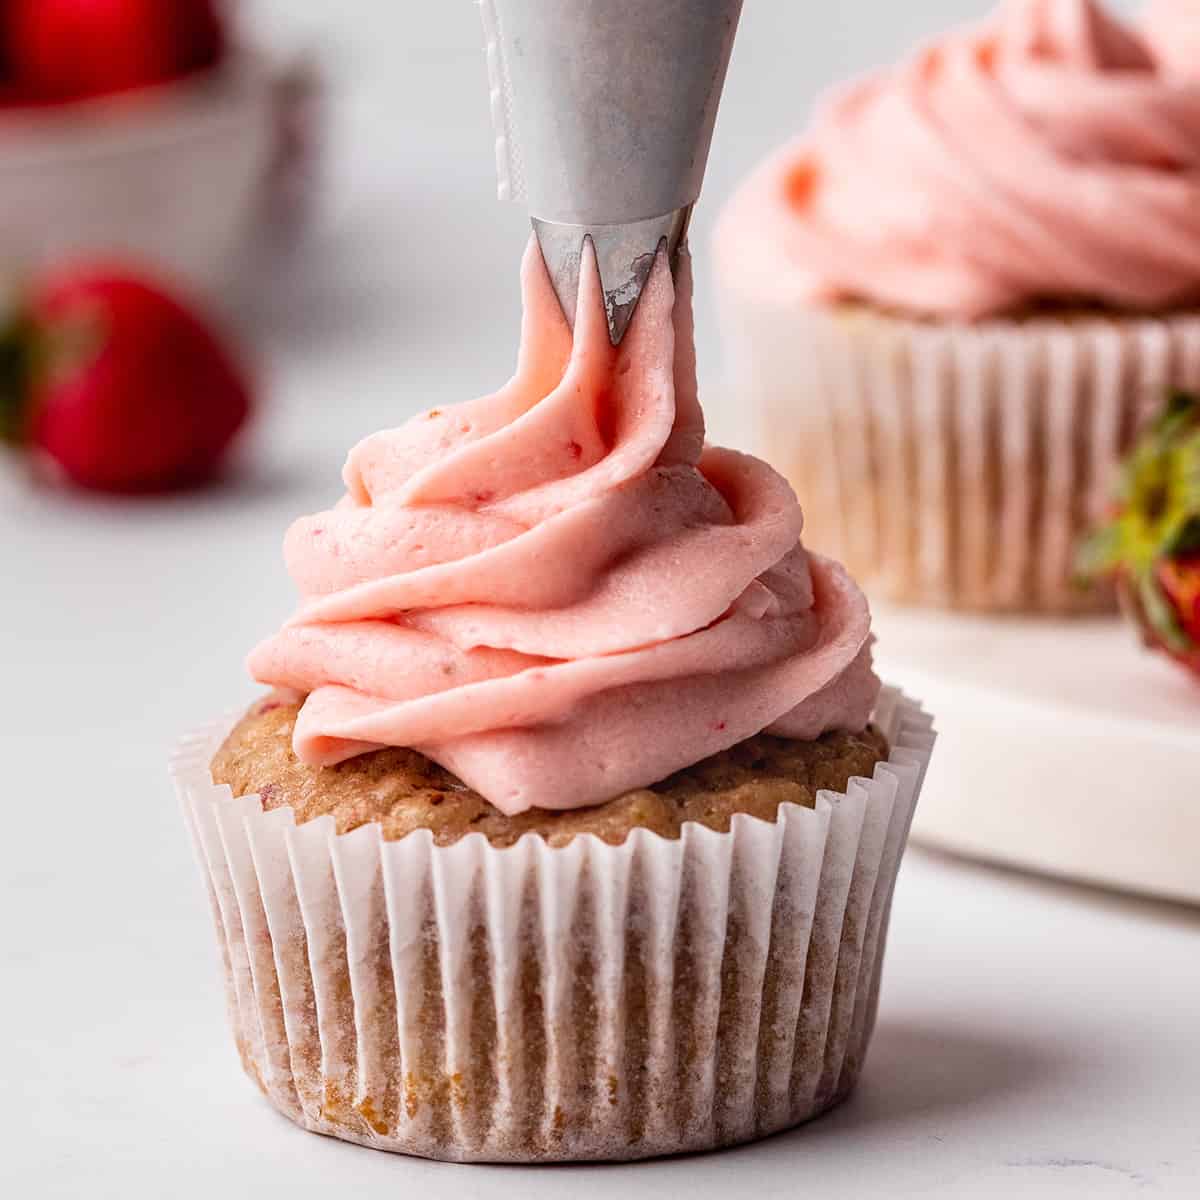 Strawberry Buttercream Frosting being piped onto a cupcake